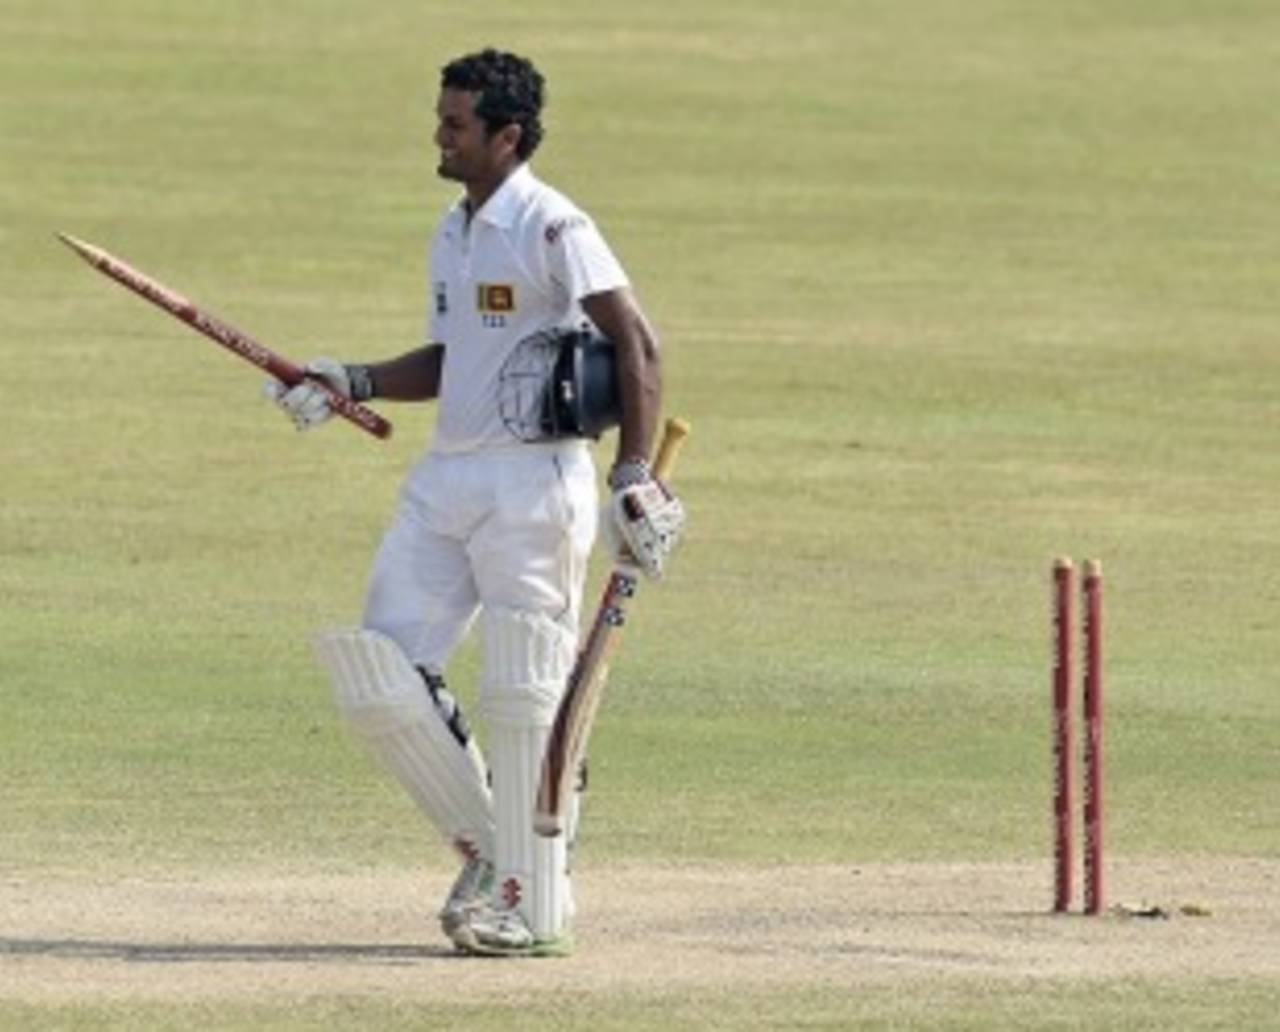 Dimuth Karunaratne made a first-innings duck on Test debut against New Zealand, but bounced back to score 60 not out in the second innings&nbsp;&nbsp;&bull;&nbsp;&nbsp;Associated Press